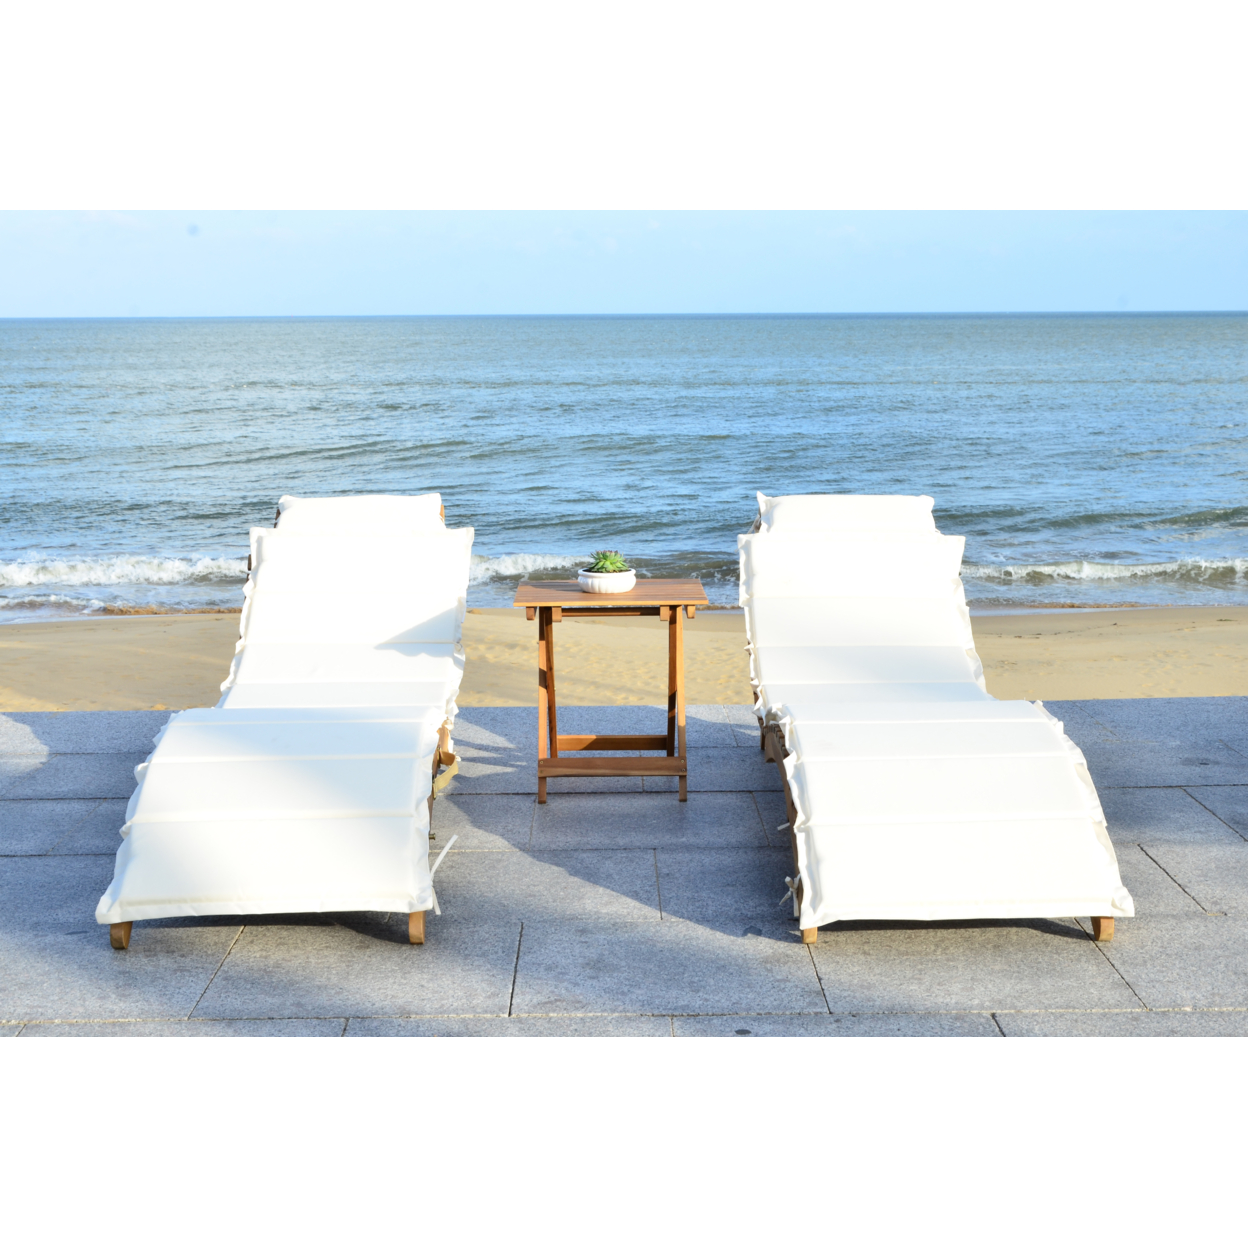 SAFAVIEH Outdoor Collection Pacifica 3-Piece Lounge Set Natural/Beige